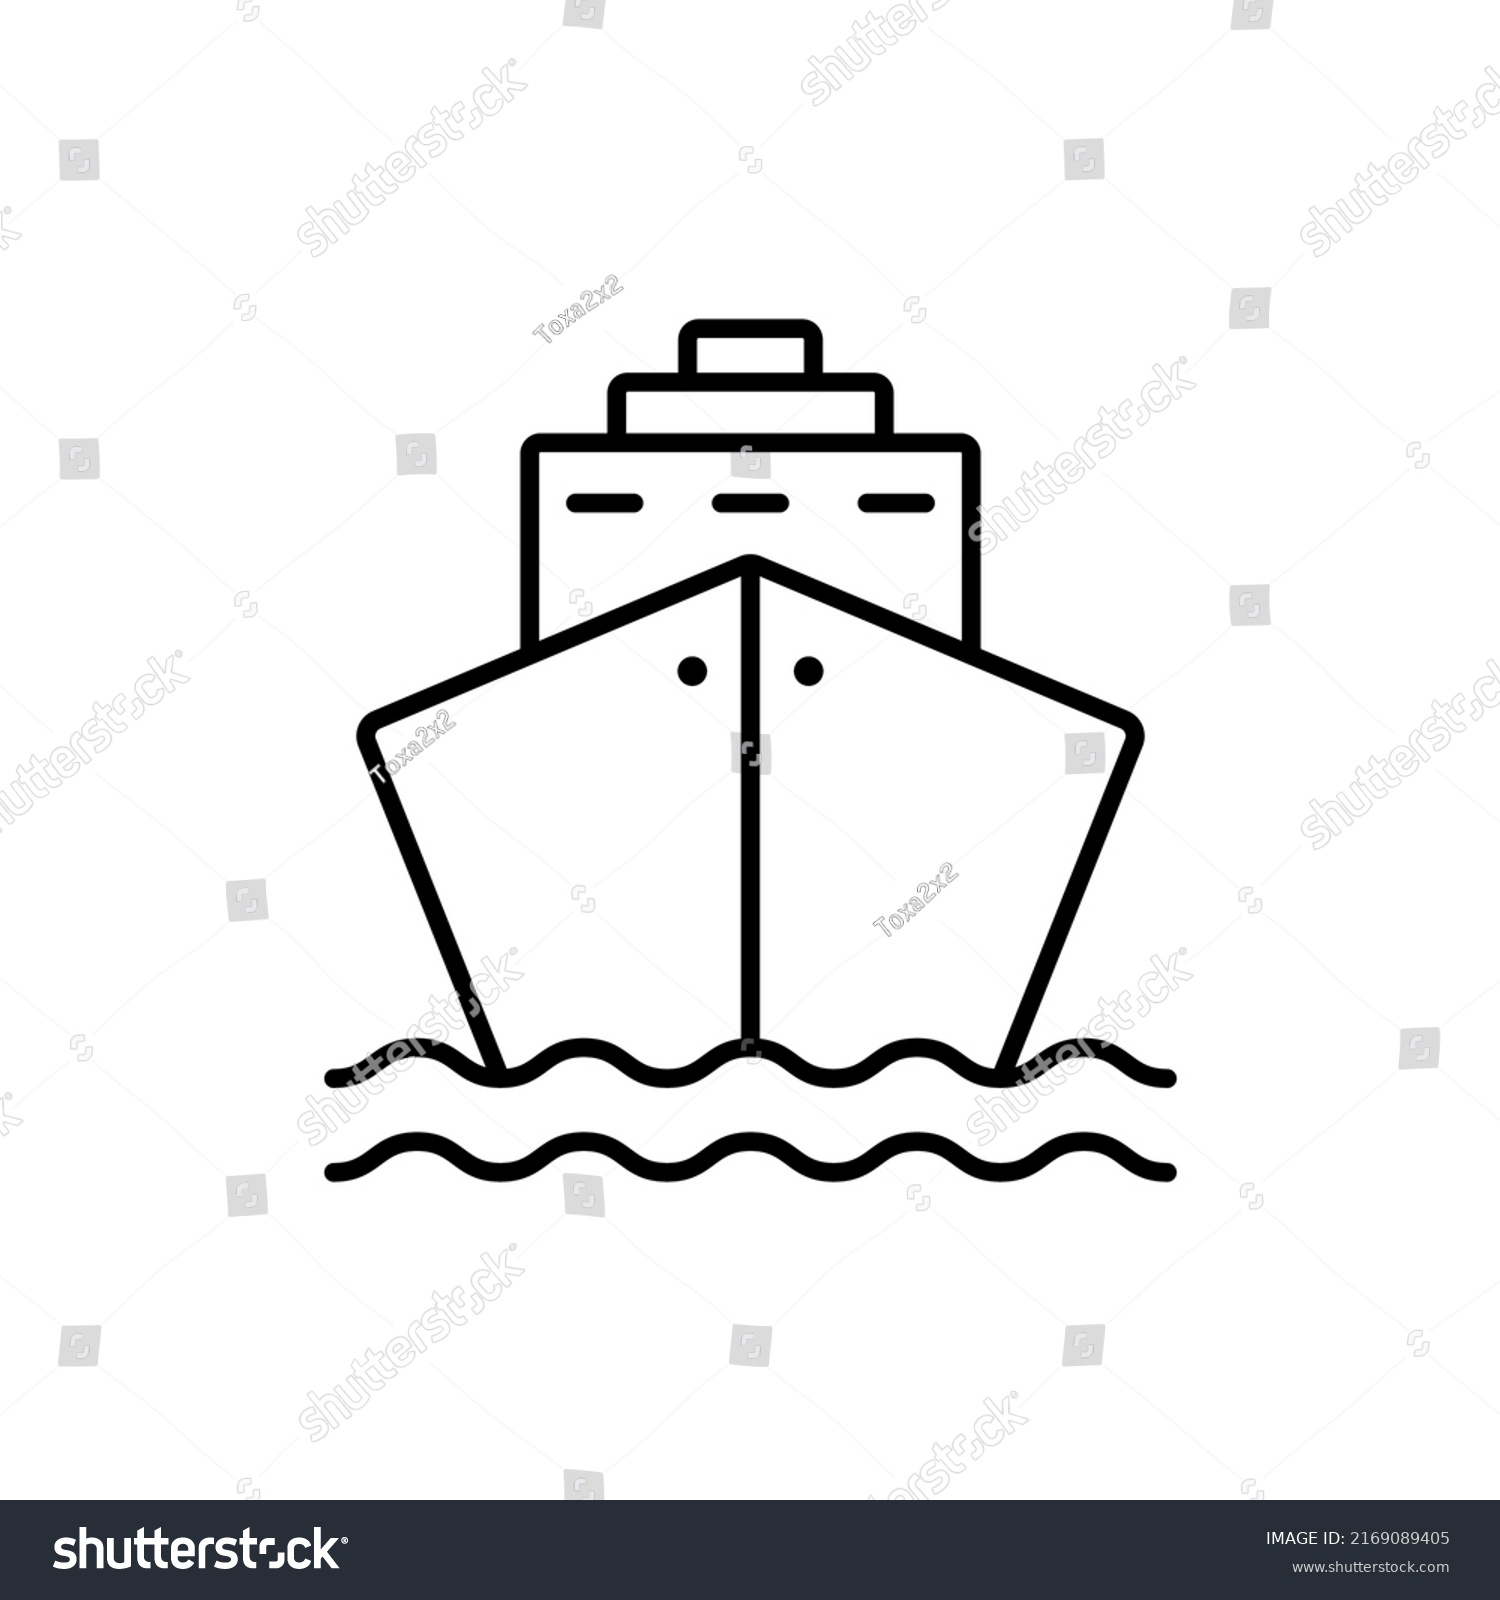 SVG of Black Cruise Ship Line Icon. Ocean Vessel Icon in Front View Linear Pictogram. Cargo Boat Outline Icon. Marine Sign for Freight, Passenger Travel. Editable Stroke. Isolated Vector Illustration. svg